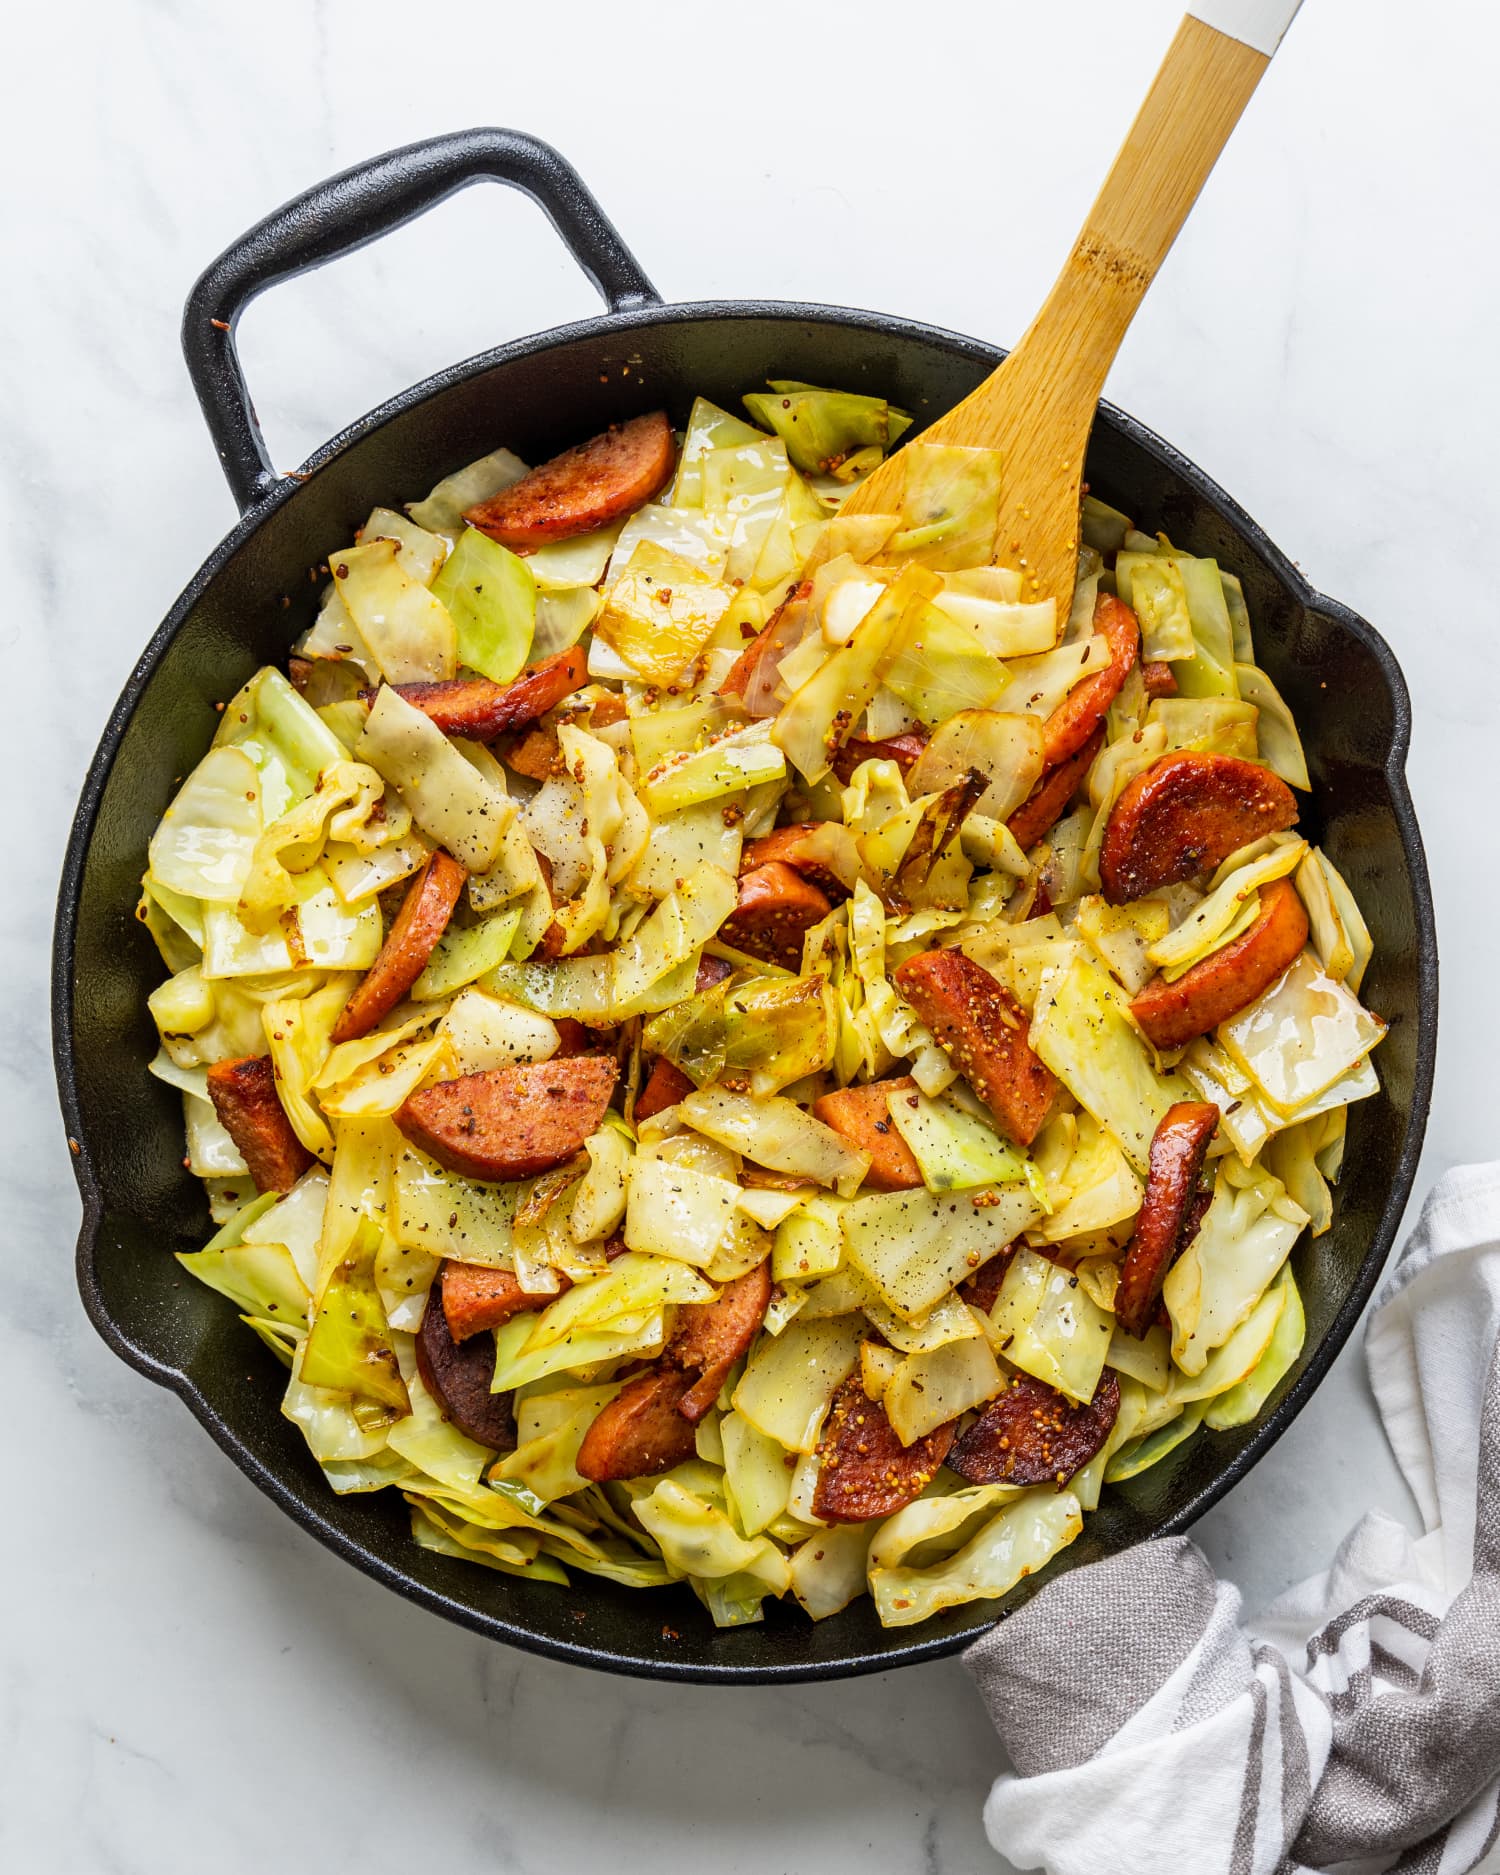 30 Best Cabbage Recipes — Ideas for Making Cabbage | Kitchn